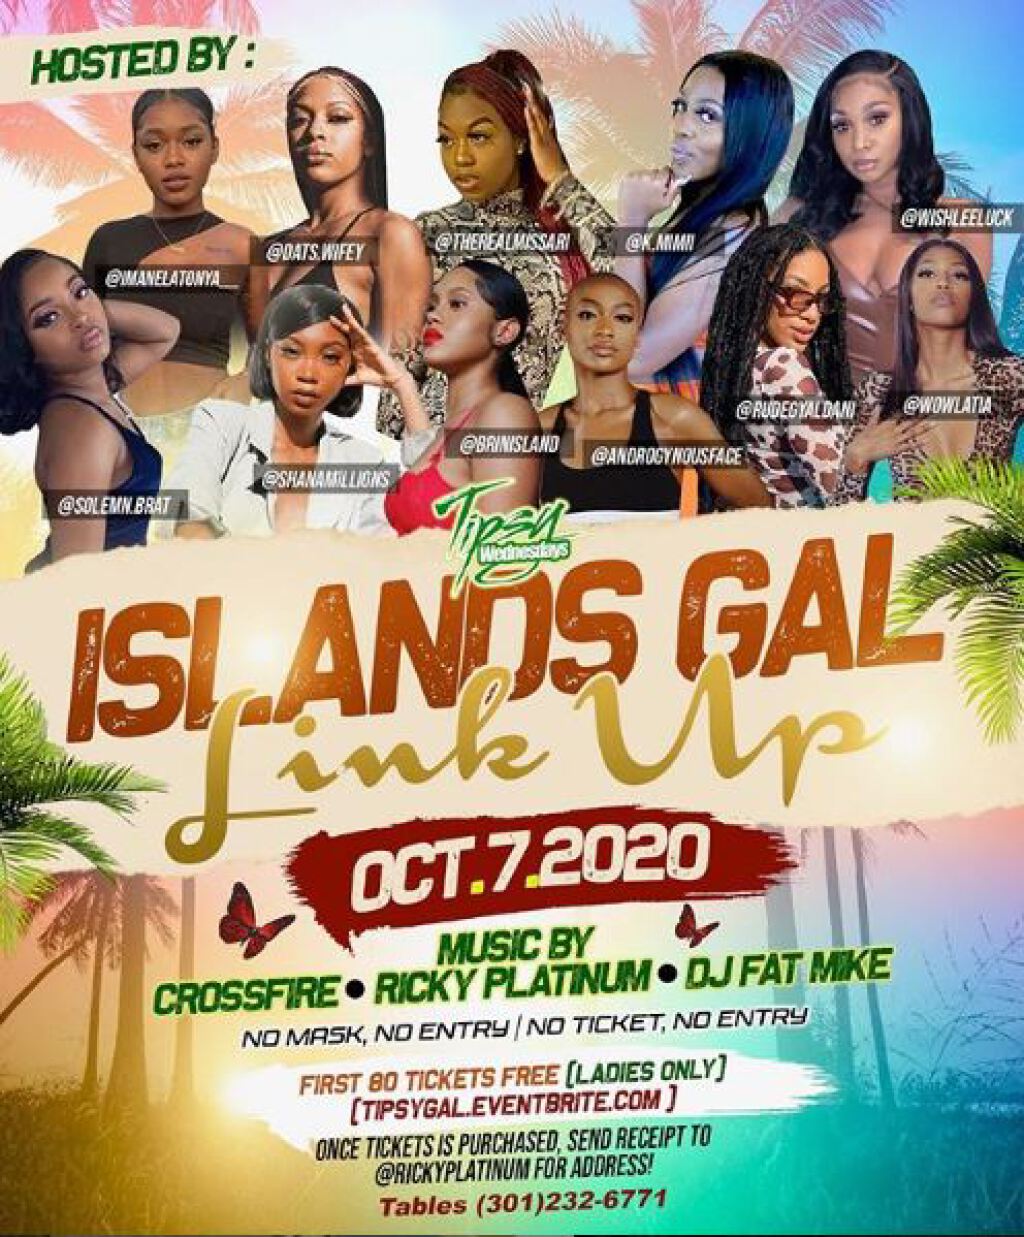 Island Gal Link Up flyer or graphic.